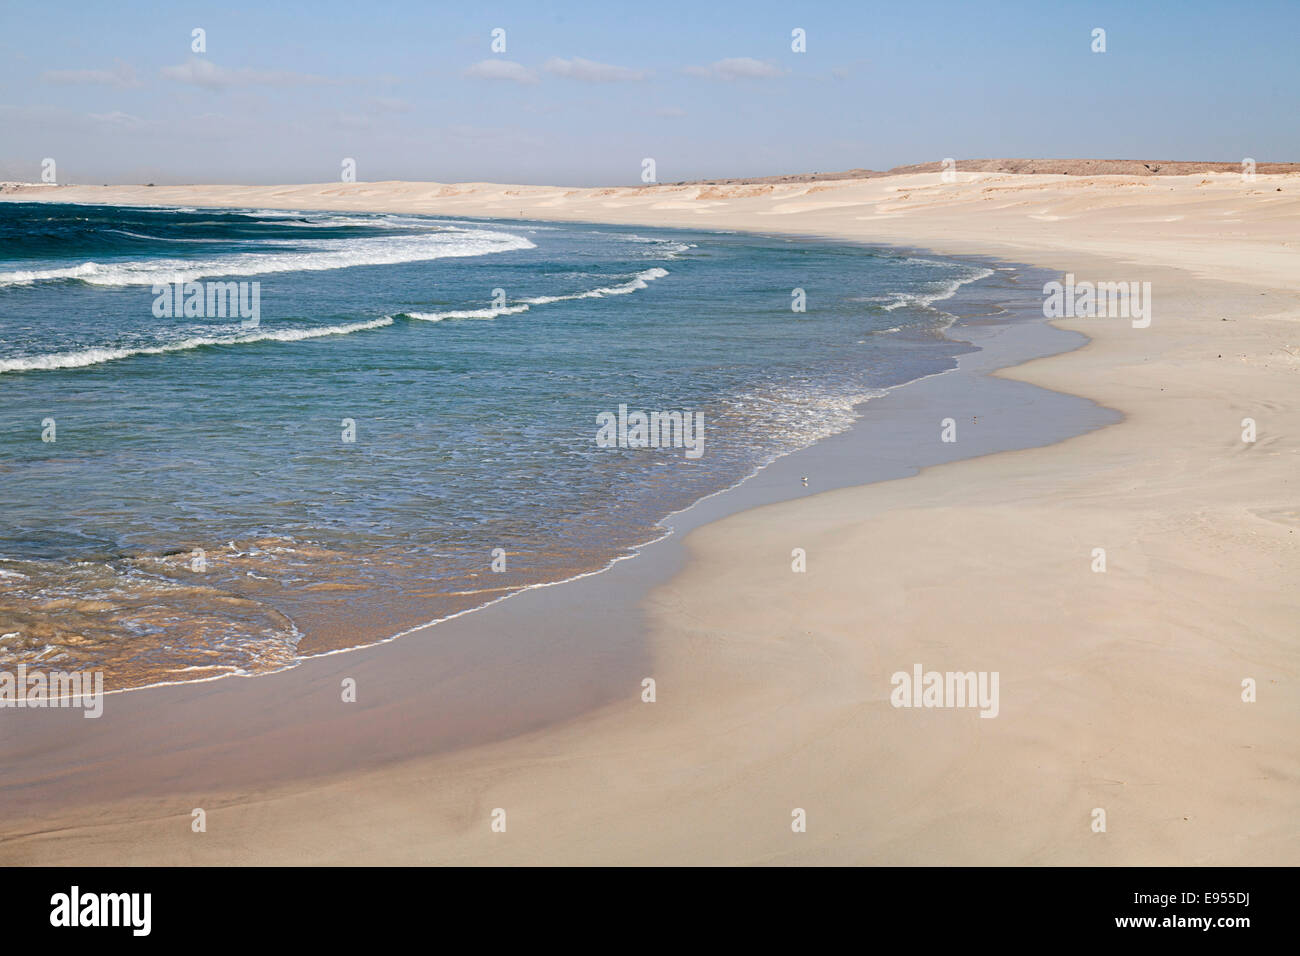 Dunes on the beach of Praia de Chaves, on the west coast of the island of Boa Vista, Cape Verde, Republic of Cabo Verde Stock Photo